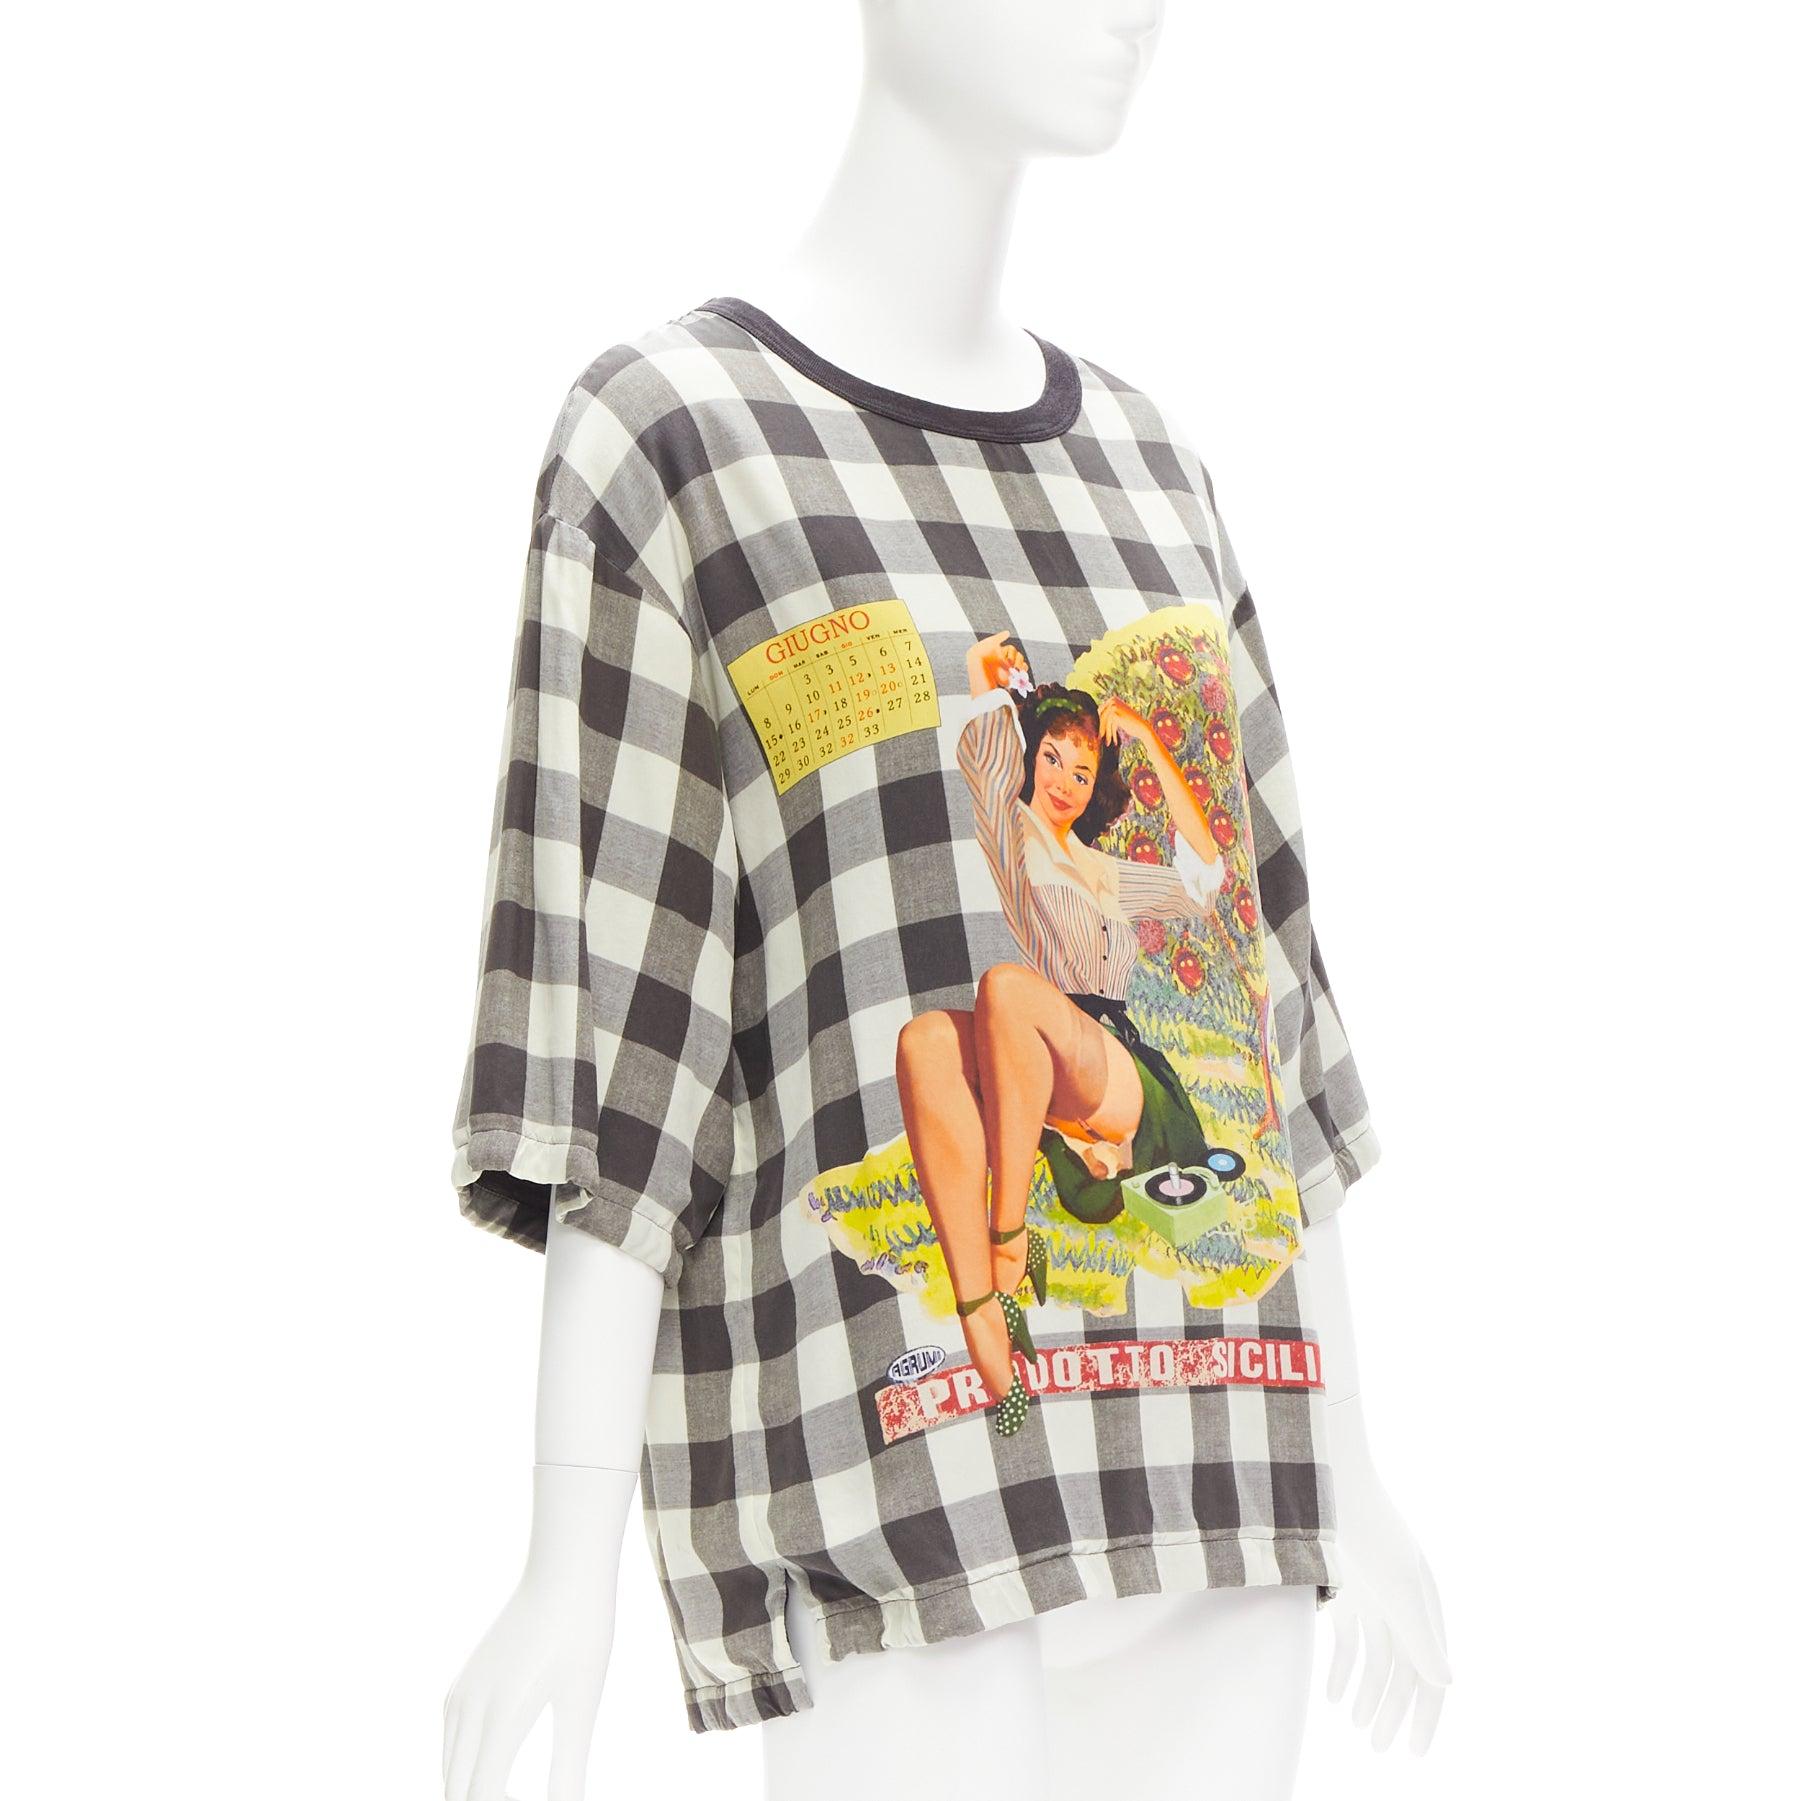 DOLCE GABBANA 100% silk pinup girl print checkered boxy tshirt top IT44 L
Reference: JACG/A00089
Brand: Dolce Gabbana
Designer: Domenico Dolce and Stefano Gabbana
Material: Silk
Color: Multicolour
Pattern: Checkered
Closure: Slip On
Lining: Black